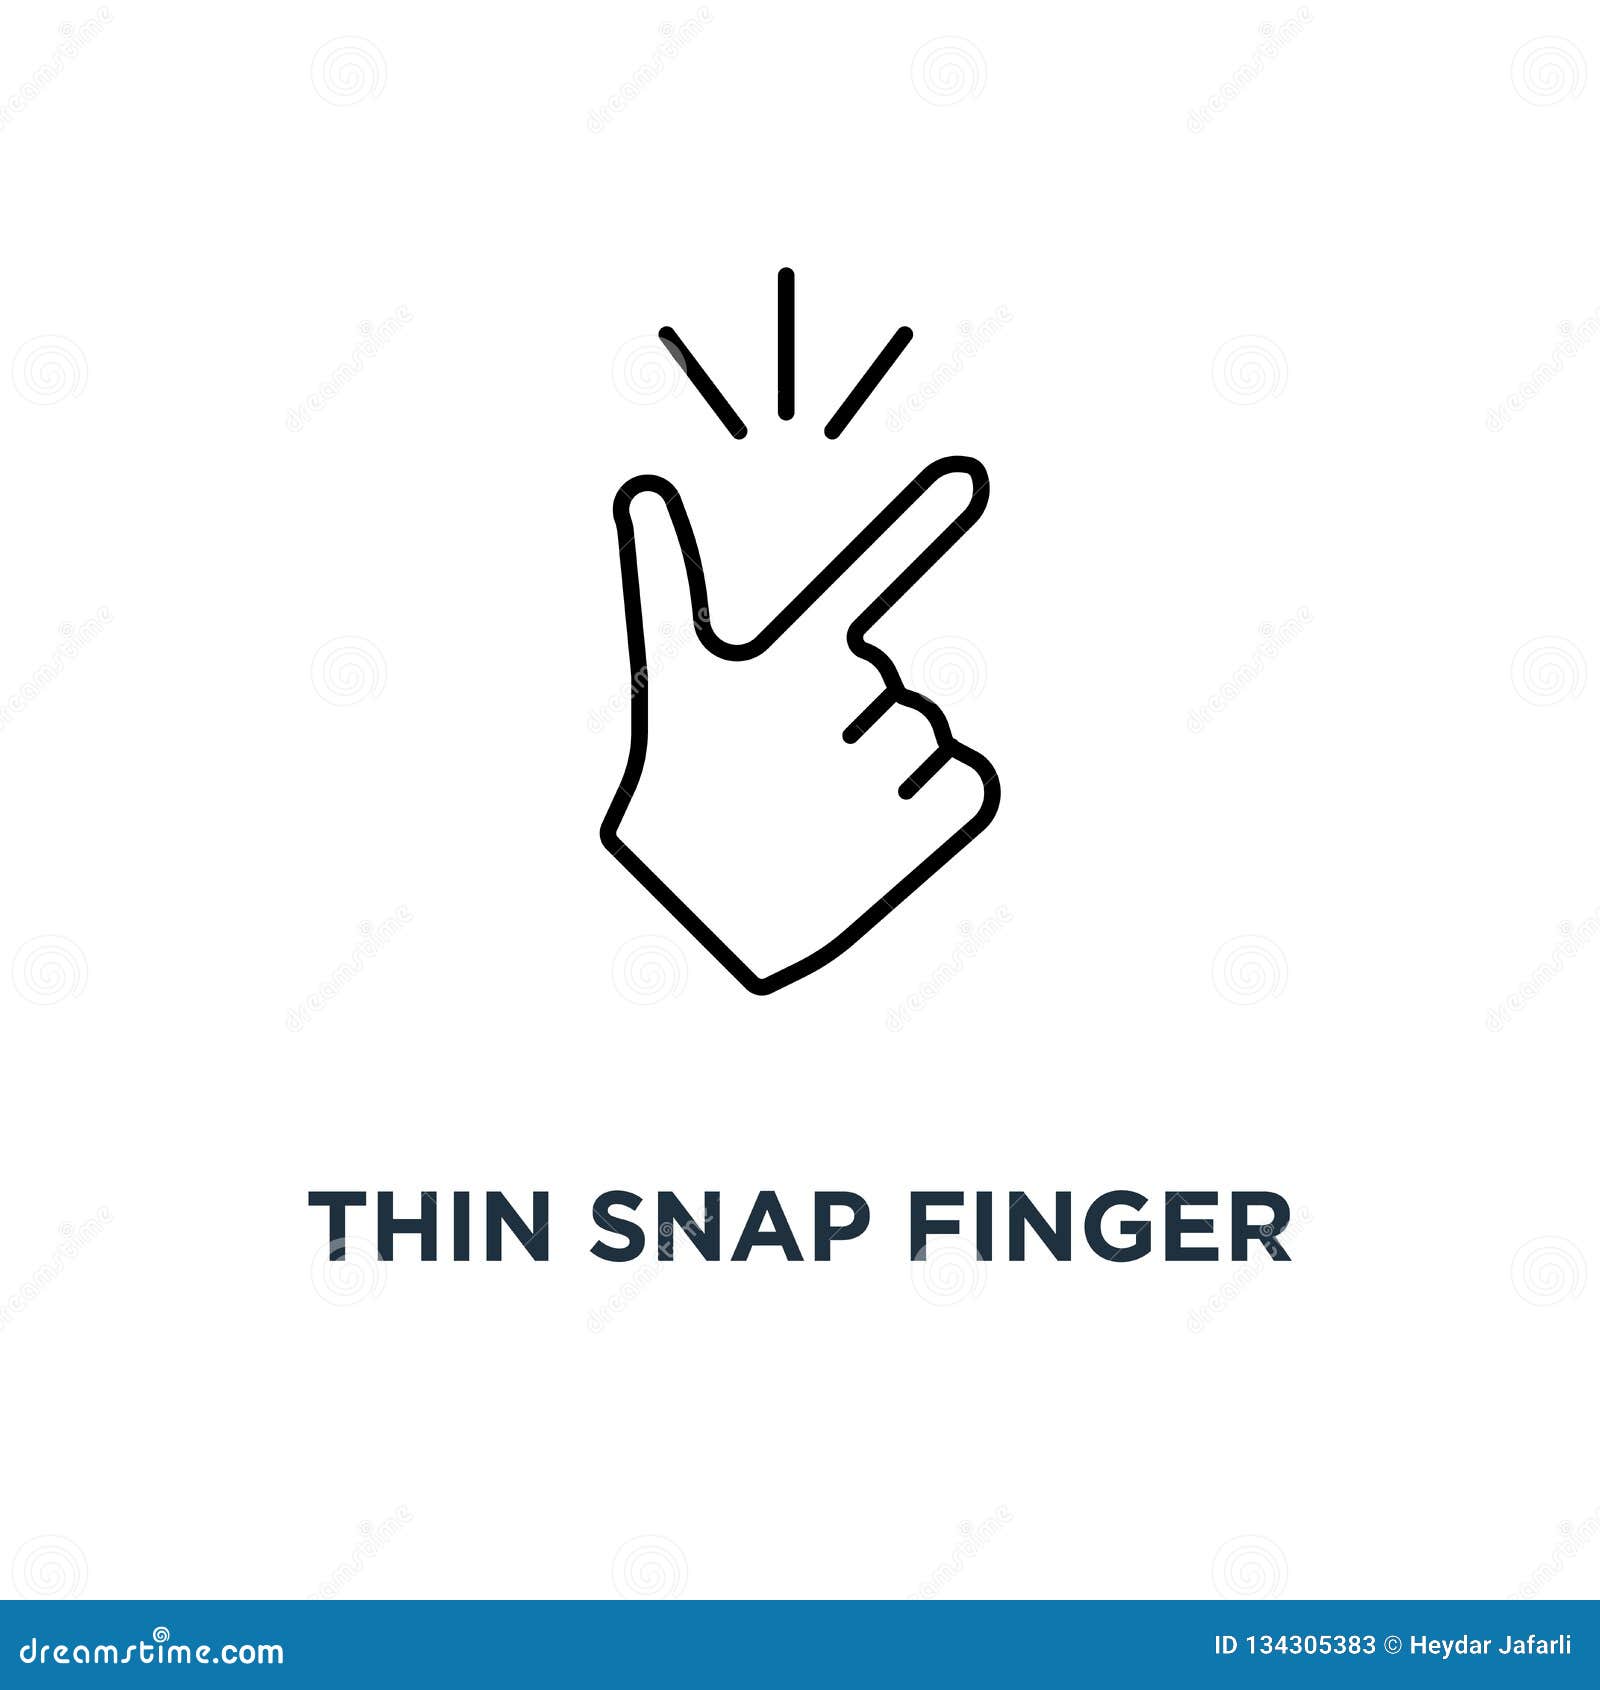 thin snap finger like easy icon,  linear abstract trend simple okey logotype graphic  concept of female or male make